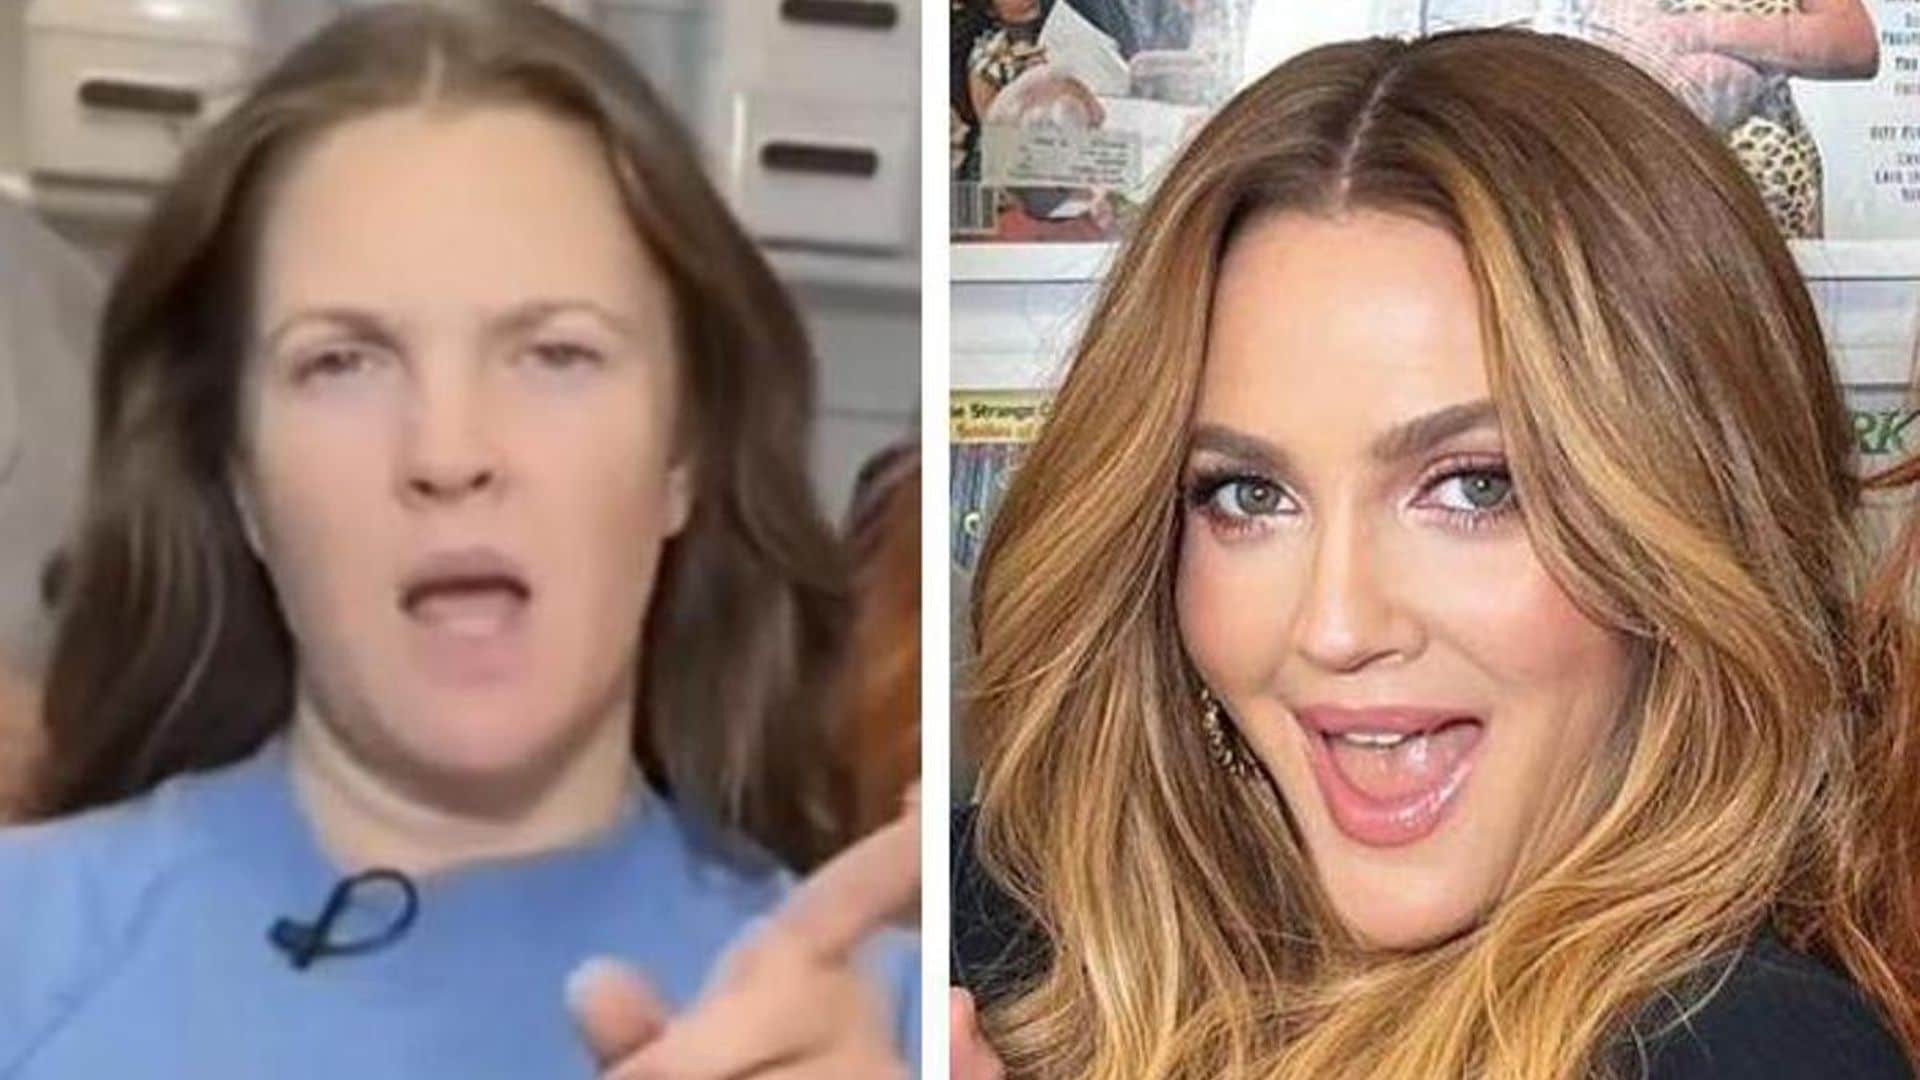 Drew Barrymore’s glam makeover has fans comparing her to JLo and the Kardashians